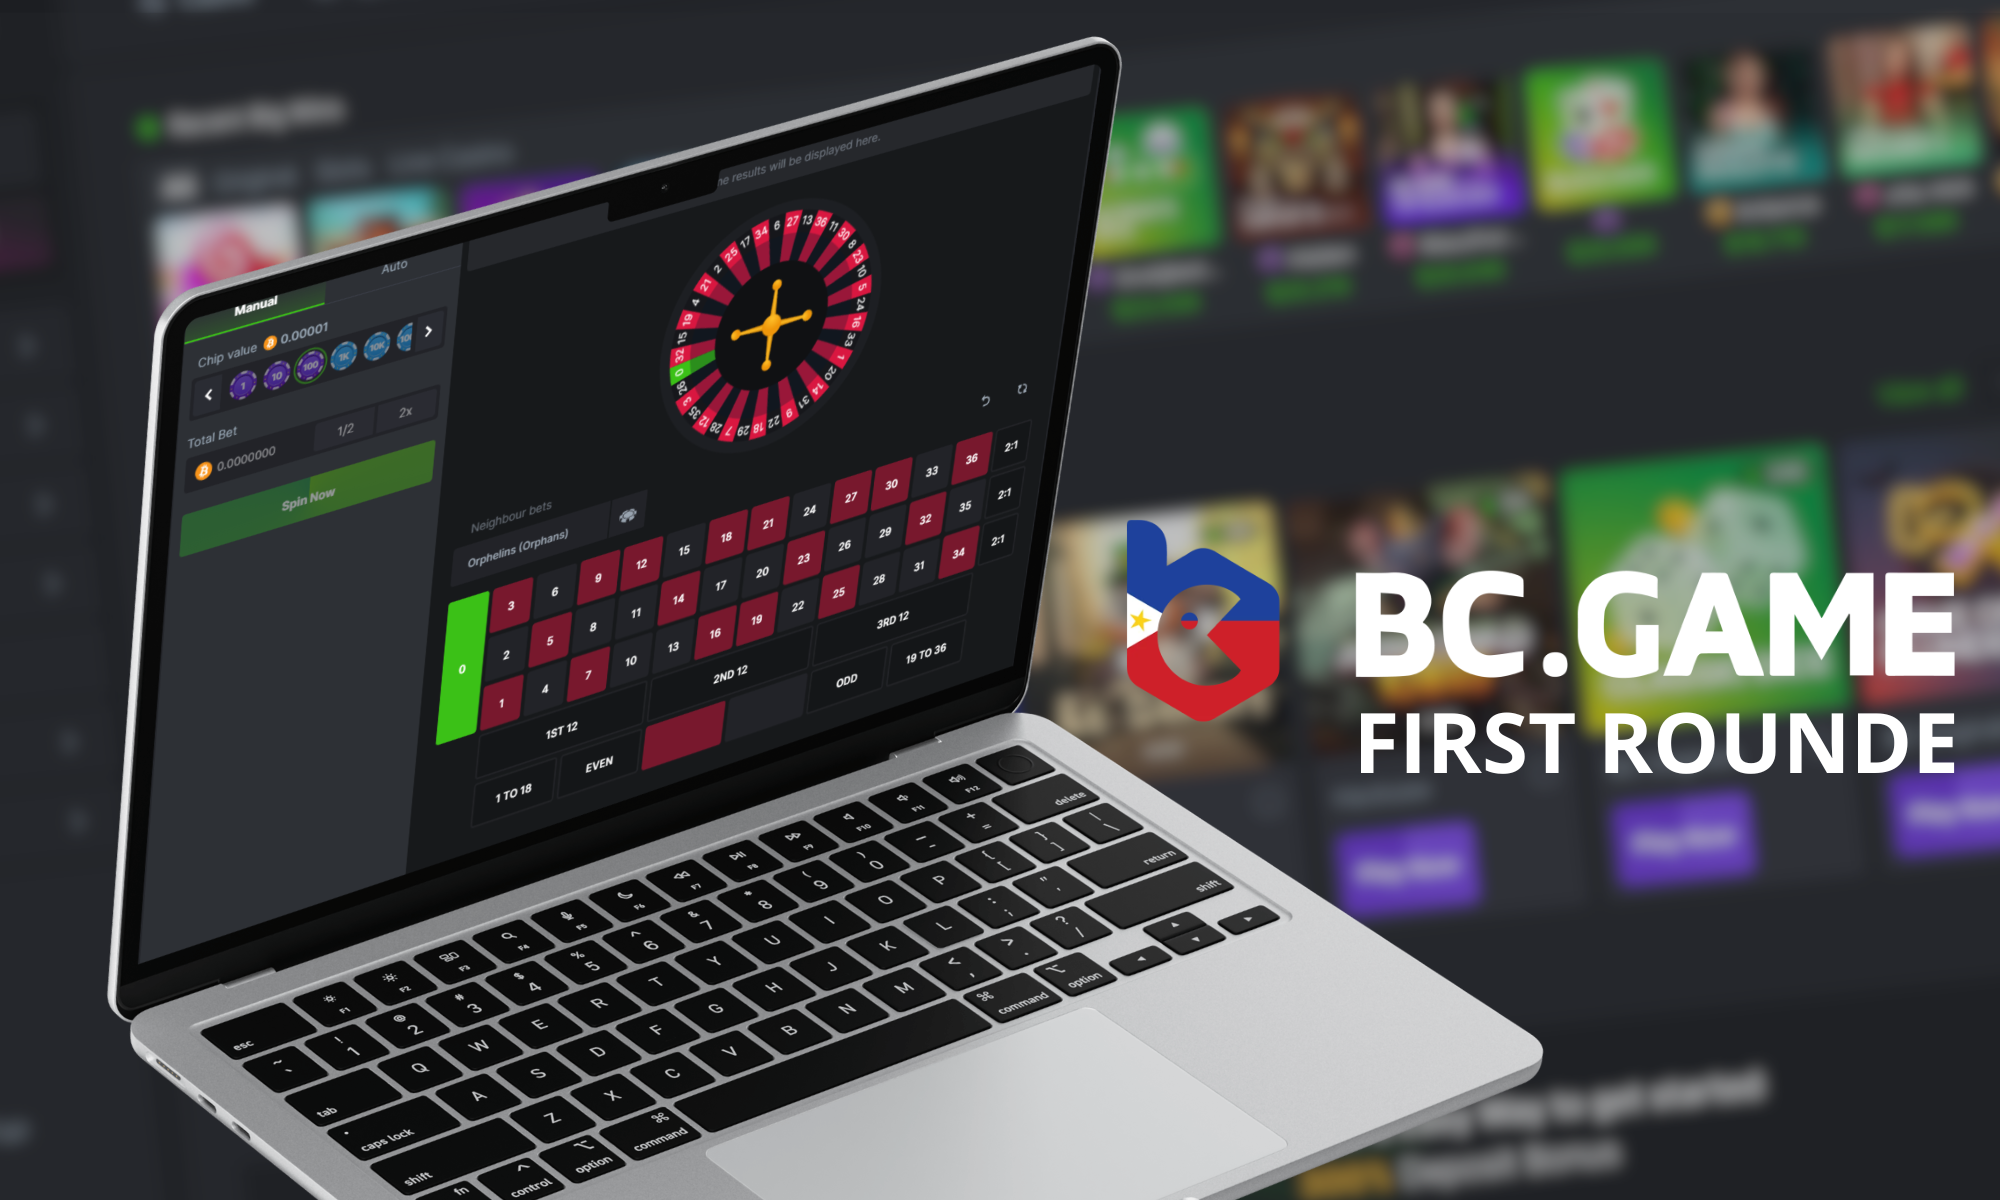 Step-by-step instructions on how to launch the first round of roulette at BC Game